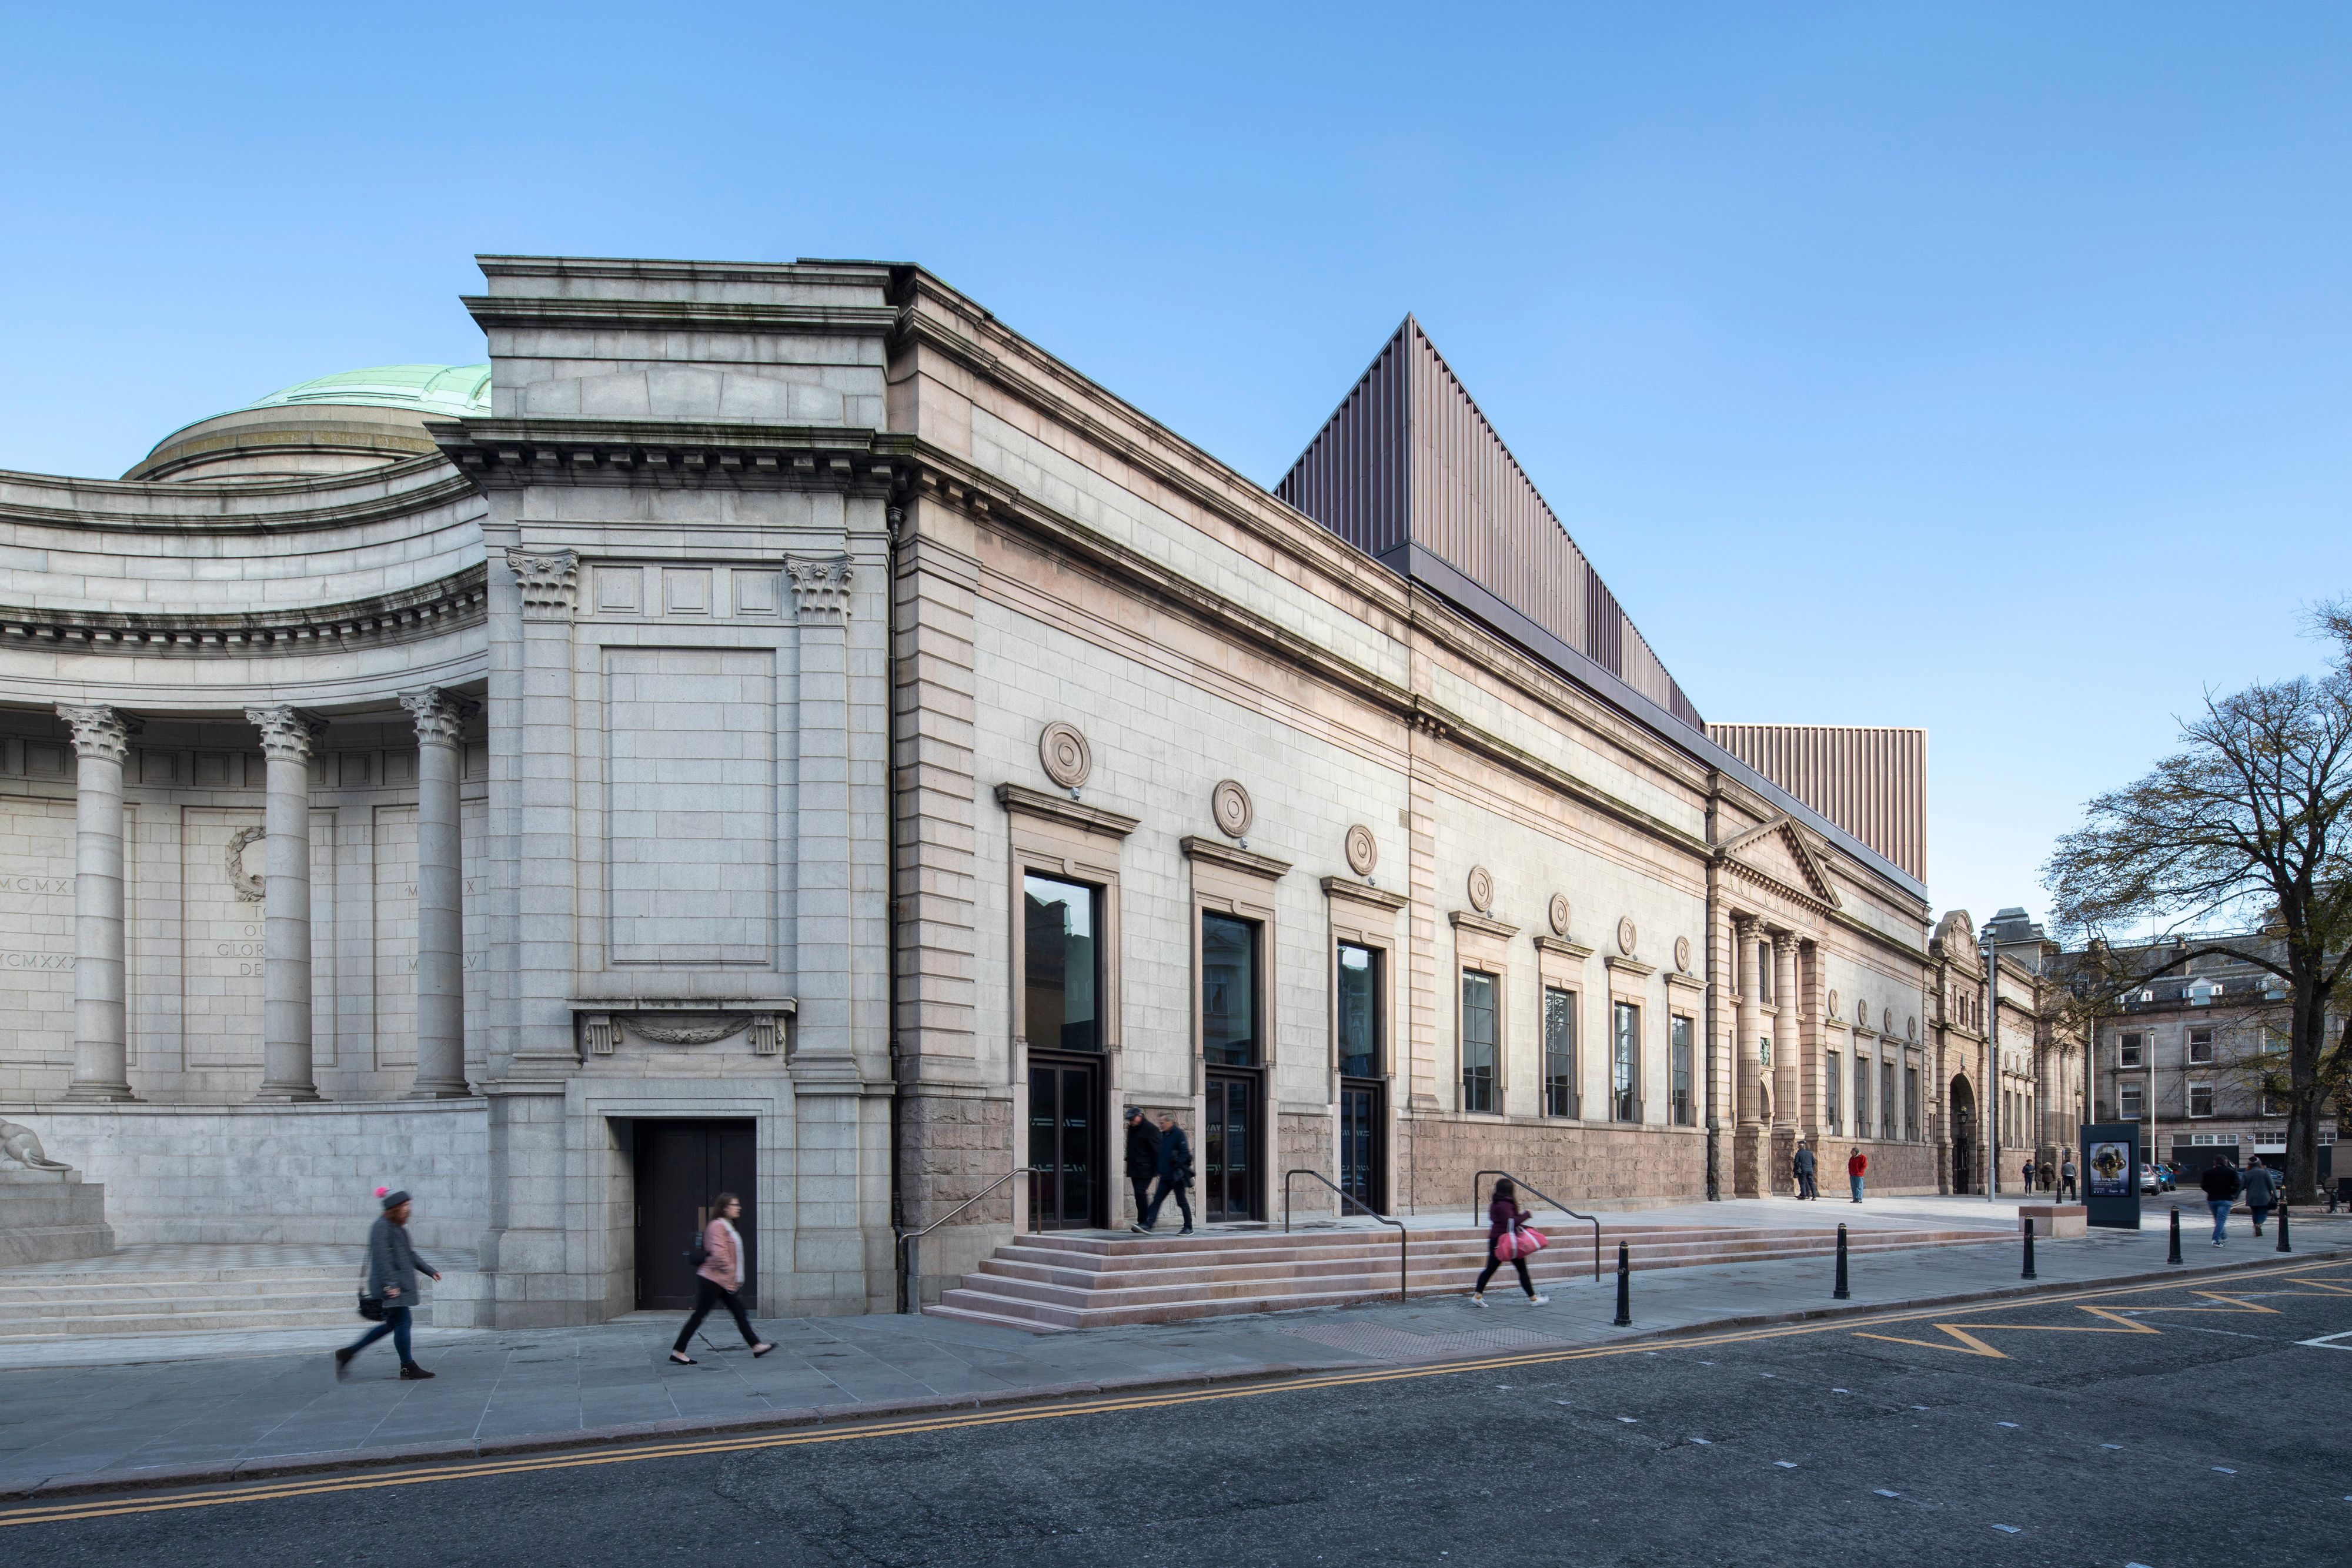 Aberdeen Art Gallery takes Andrew Doolan award for building of the year